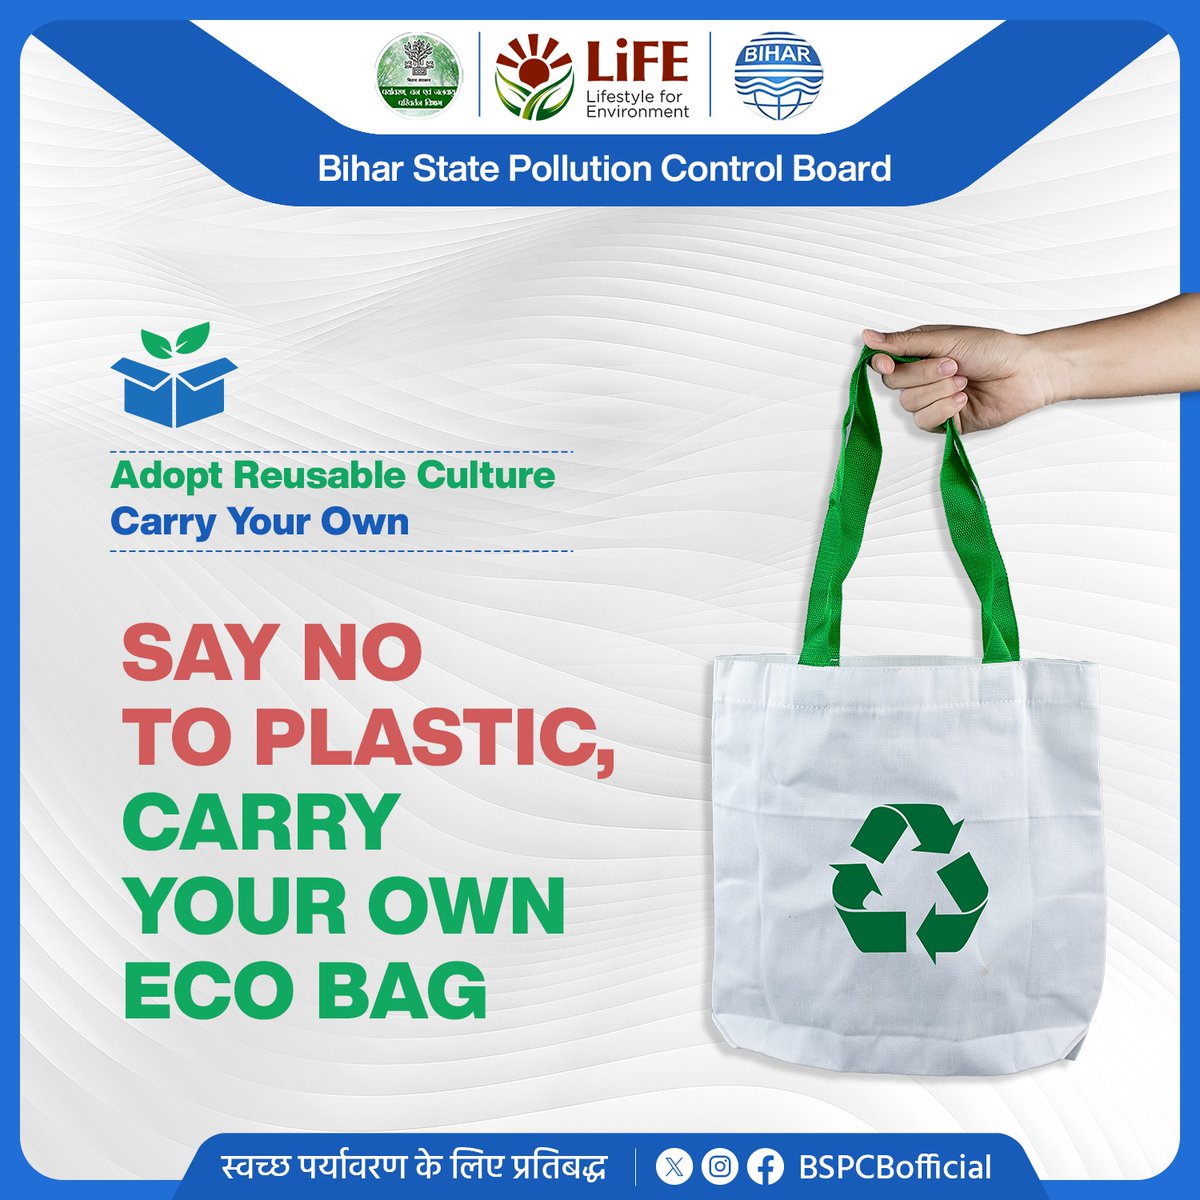 🌍 Say No to Plastic! 🌿
Carry your own eco bag and make a difference. Every small step helps in protecting our planet. 🌱🛍️

#EcoFriendly #SayNoToPlastic #Sustainability #GoGreen #ReduceReuseRecycle #ProtectThePlanet @shukla_dk @chandruifs @BandanaPreyashi